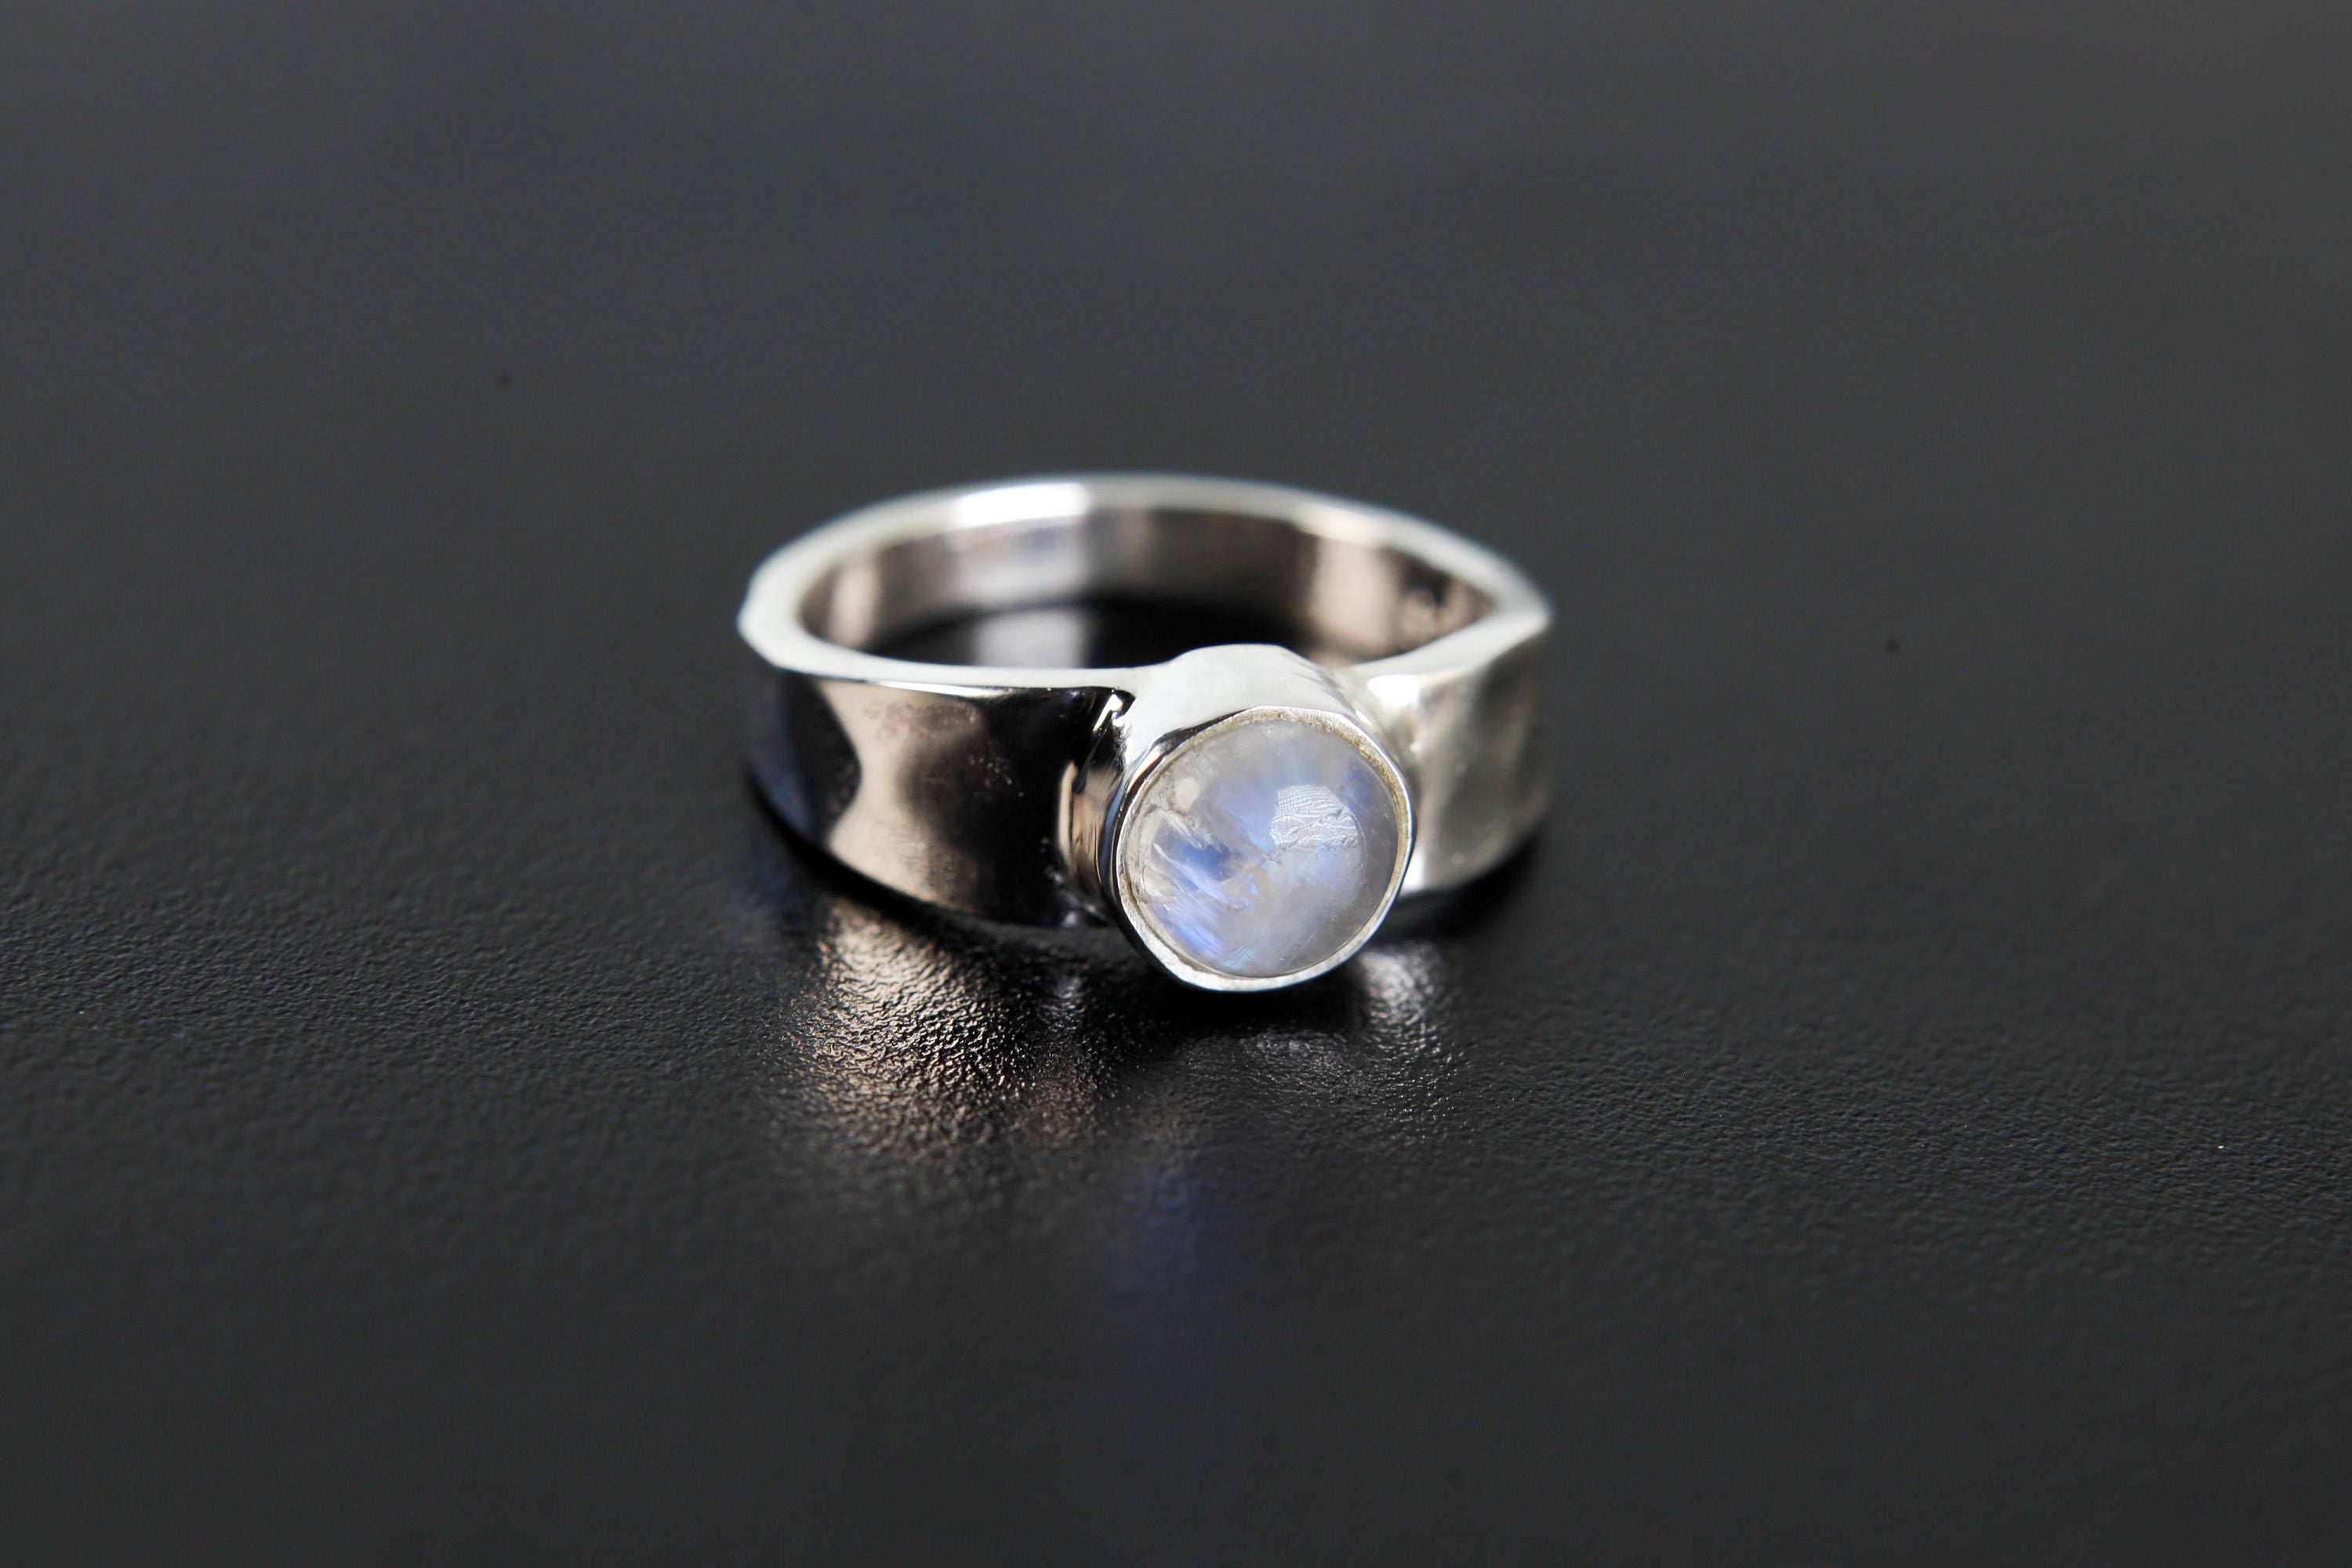 Round Vibrant Blue Moonstone Cabochon - Hammered Ring Band - Unisex - 925 Sterling Silver Setting - High Shine Polish